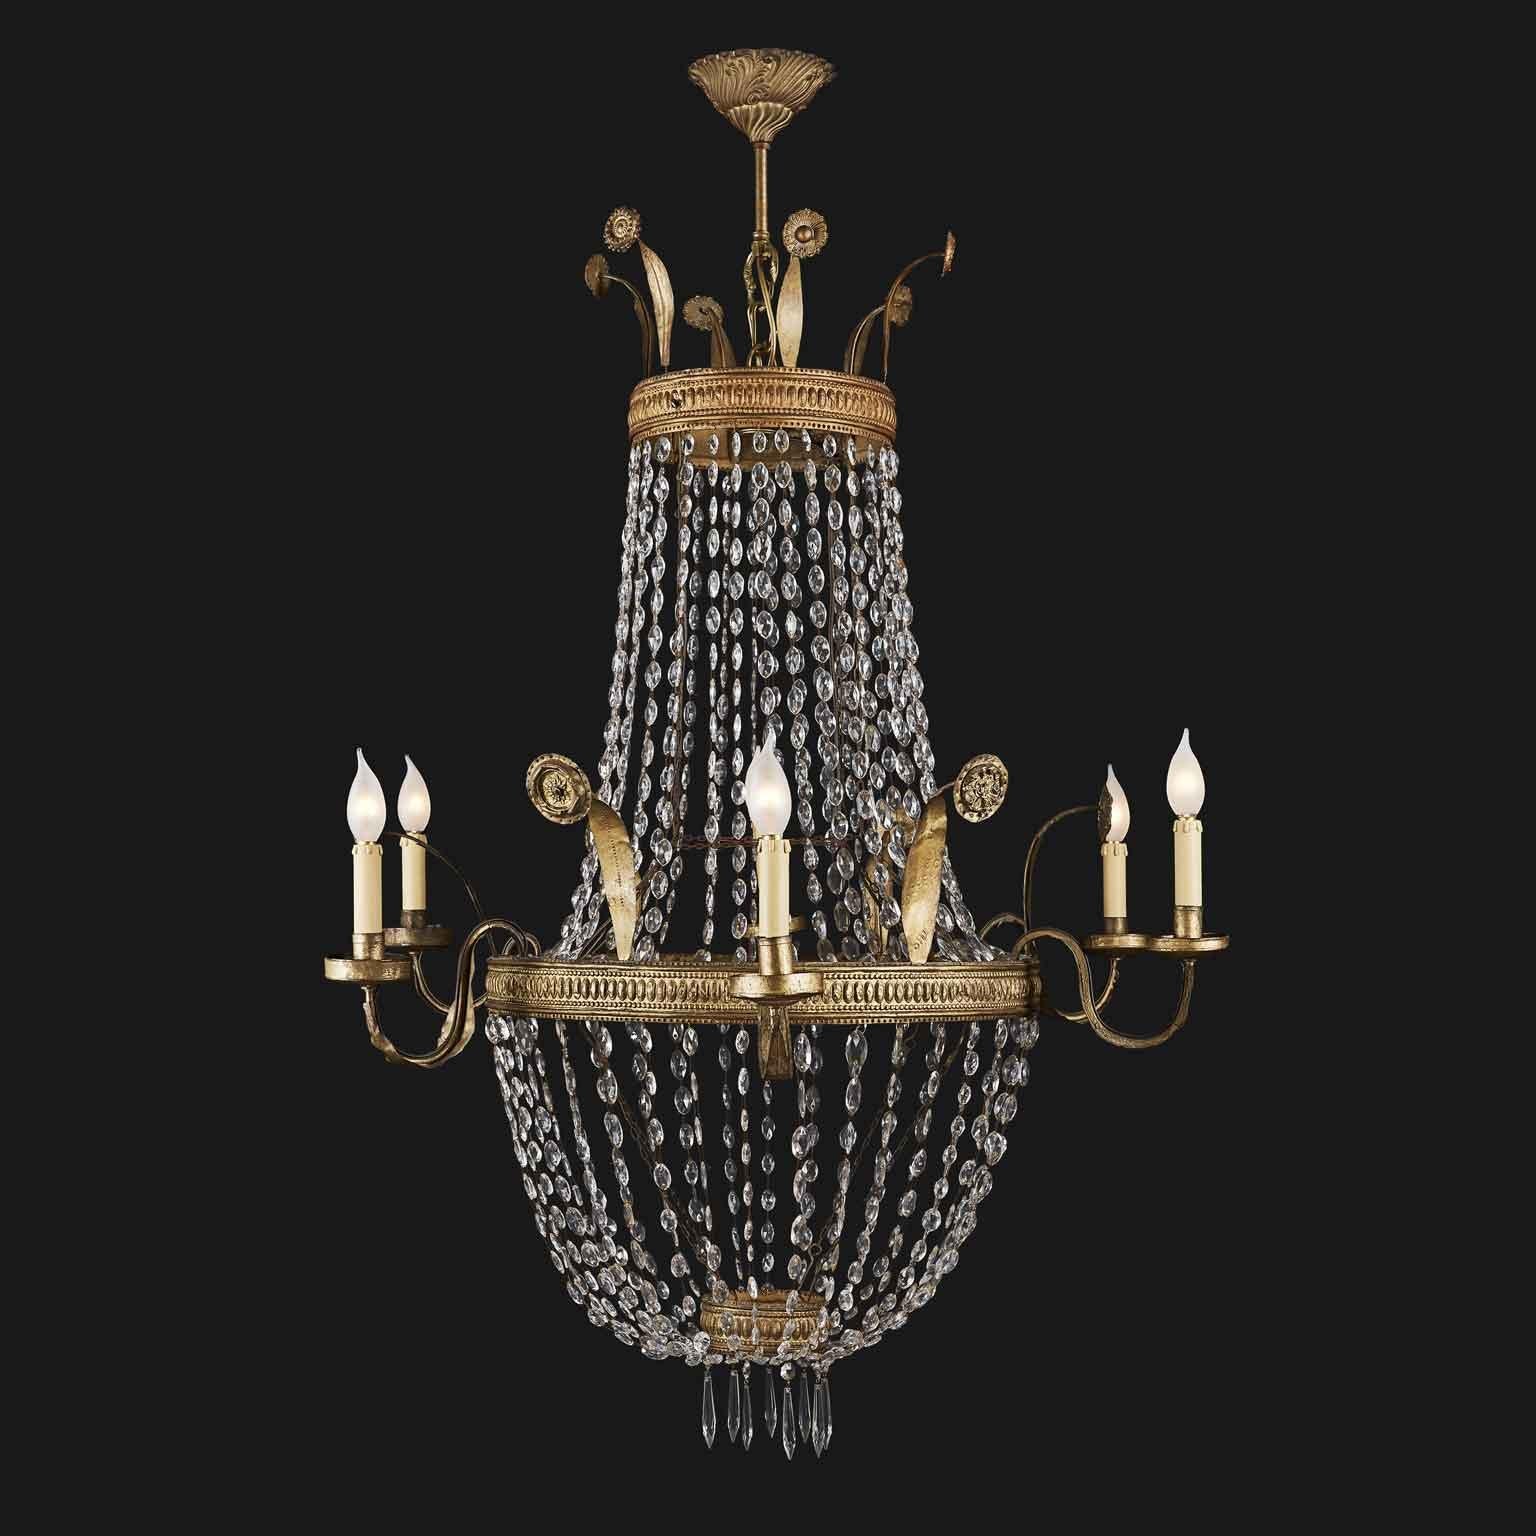 A stunning Empire Crystal chandelier of Italian origin, coming from a Tuscan private palazzo in Florence dating back to the early 19th century. 
Repoussé brass, iron and crystal are the materials of this large drop shaped Italian chandelier of